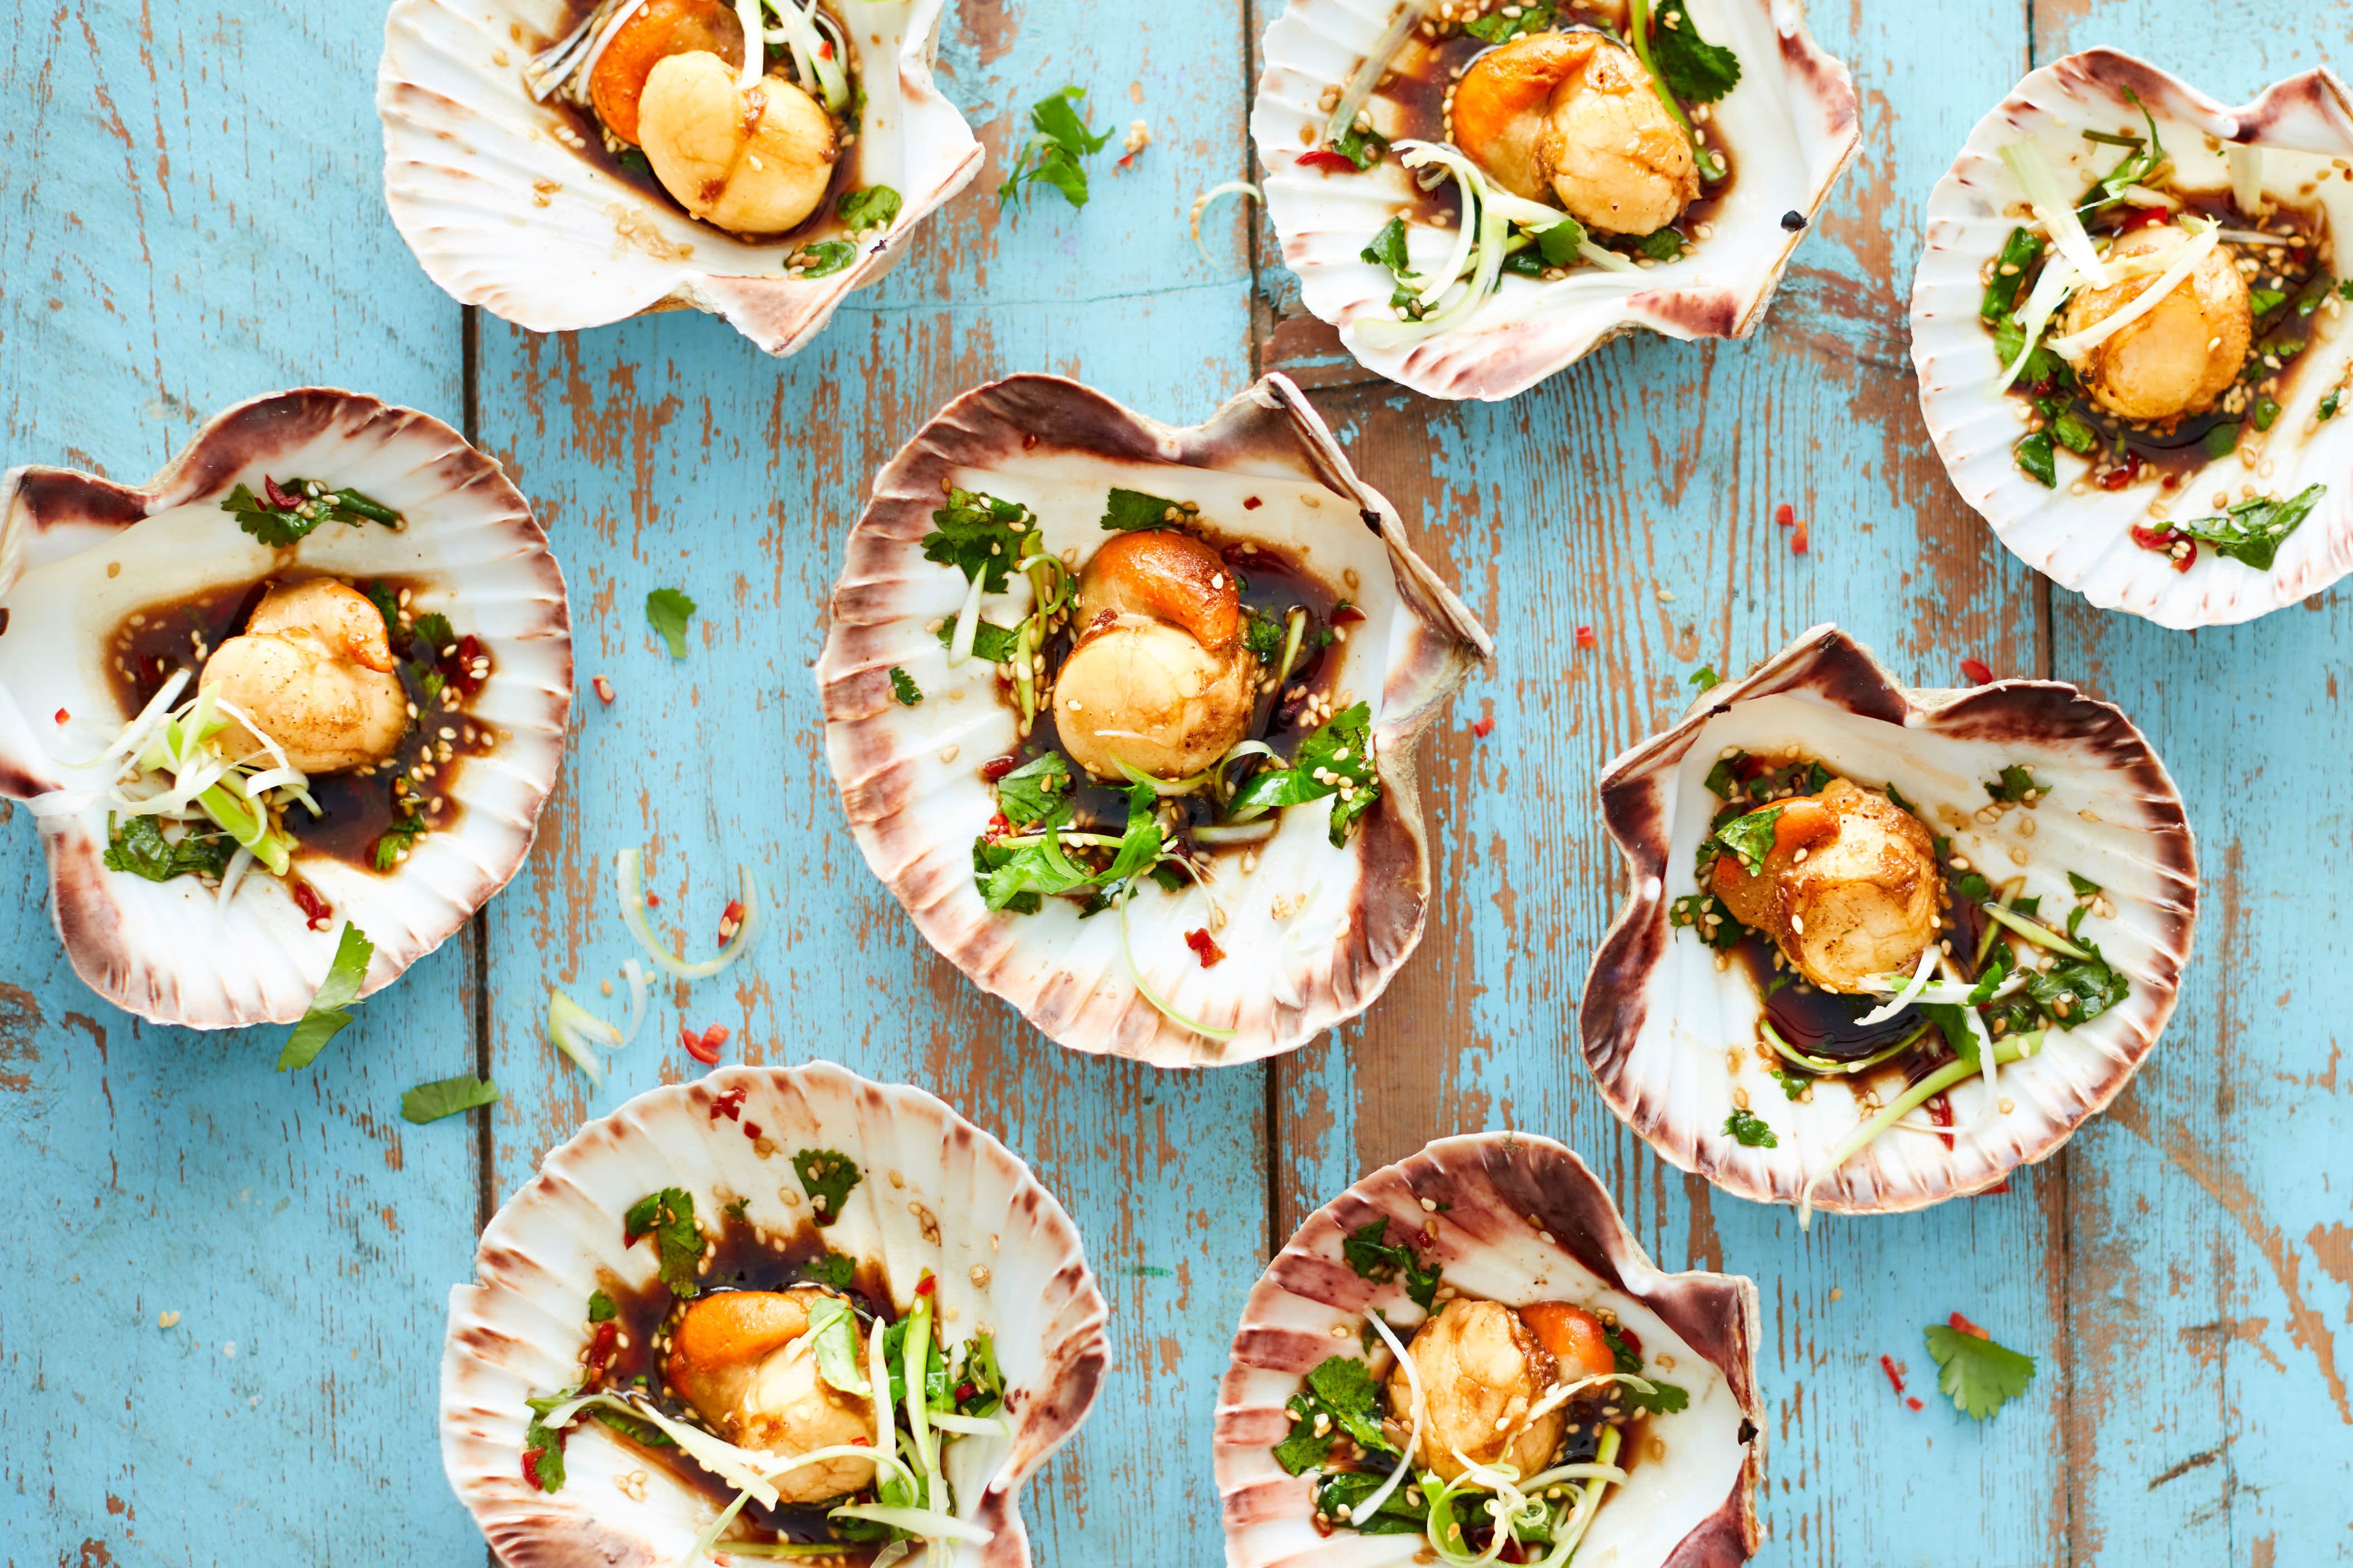 How to Cook Scallops